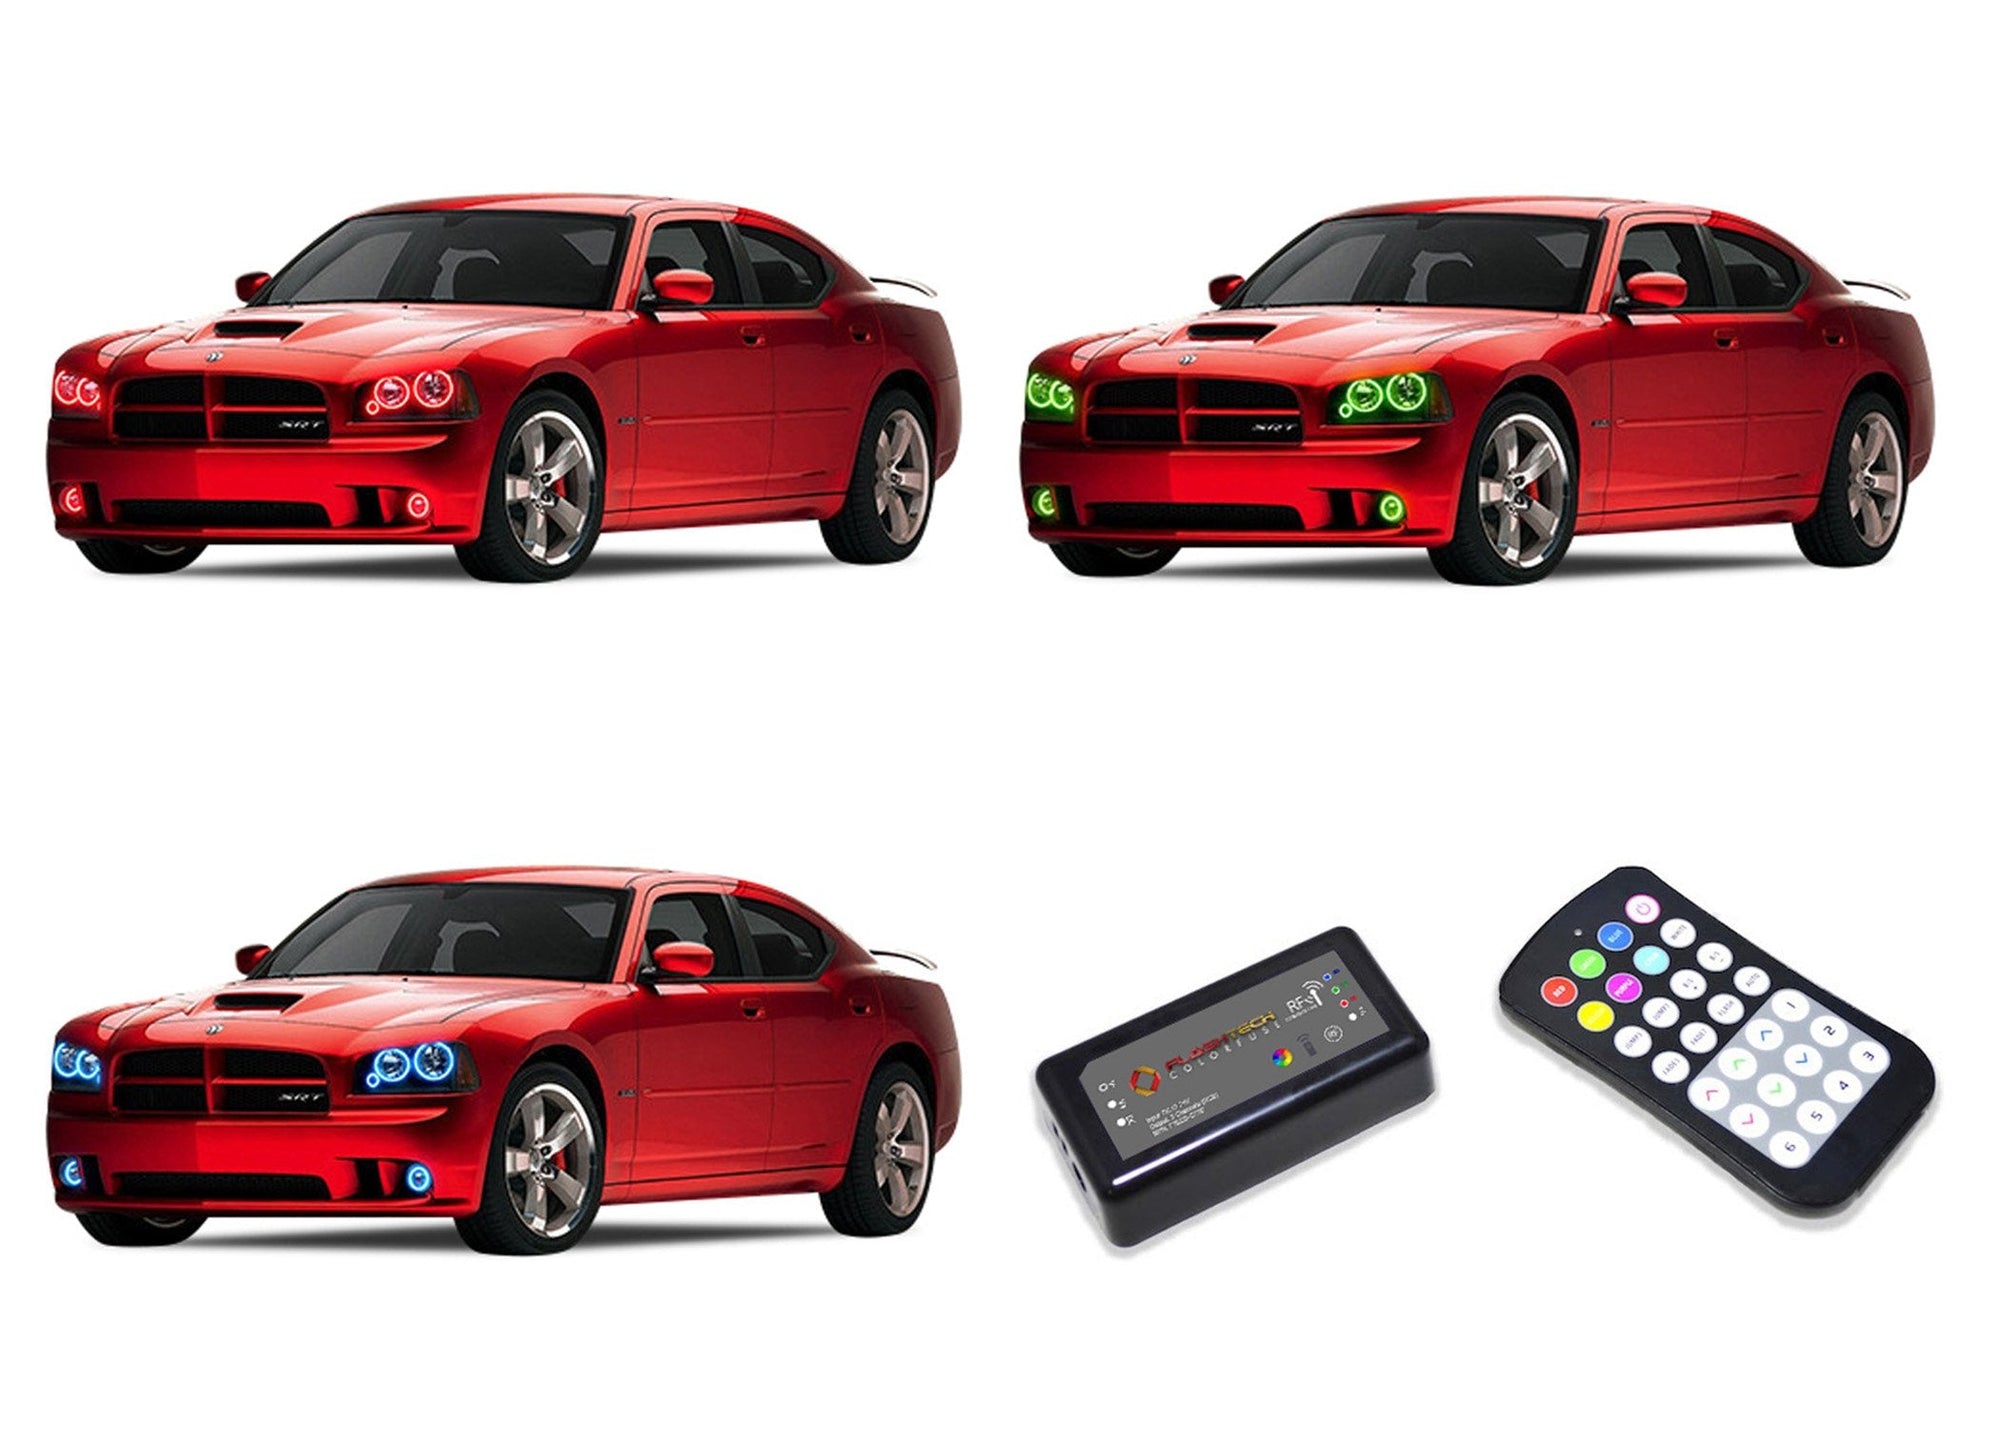 Dodge-Charger-2005, 2006, 2007, 2008, 2009, 2010-LED-Halo-Headlights and Fog Lights-RGB-Colorfuse RF Remote-DO-CR0510-V3HFCFRF